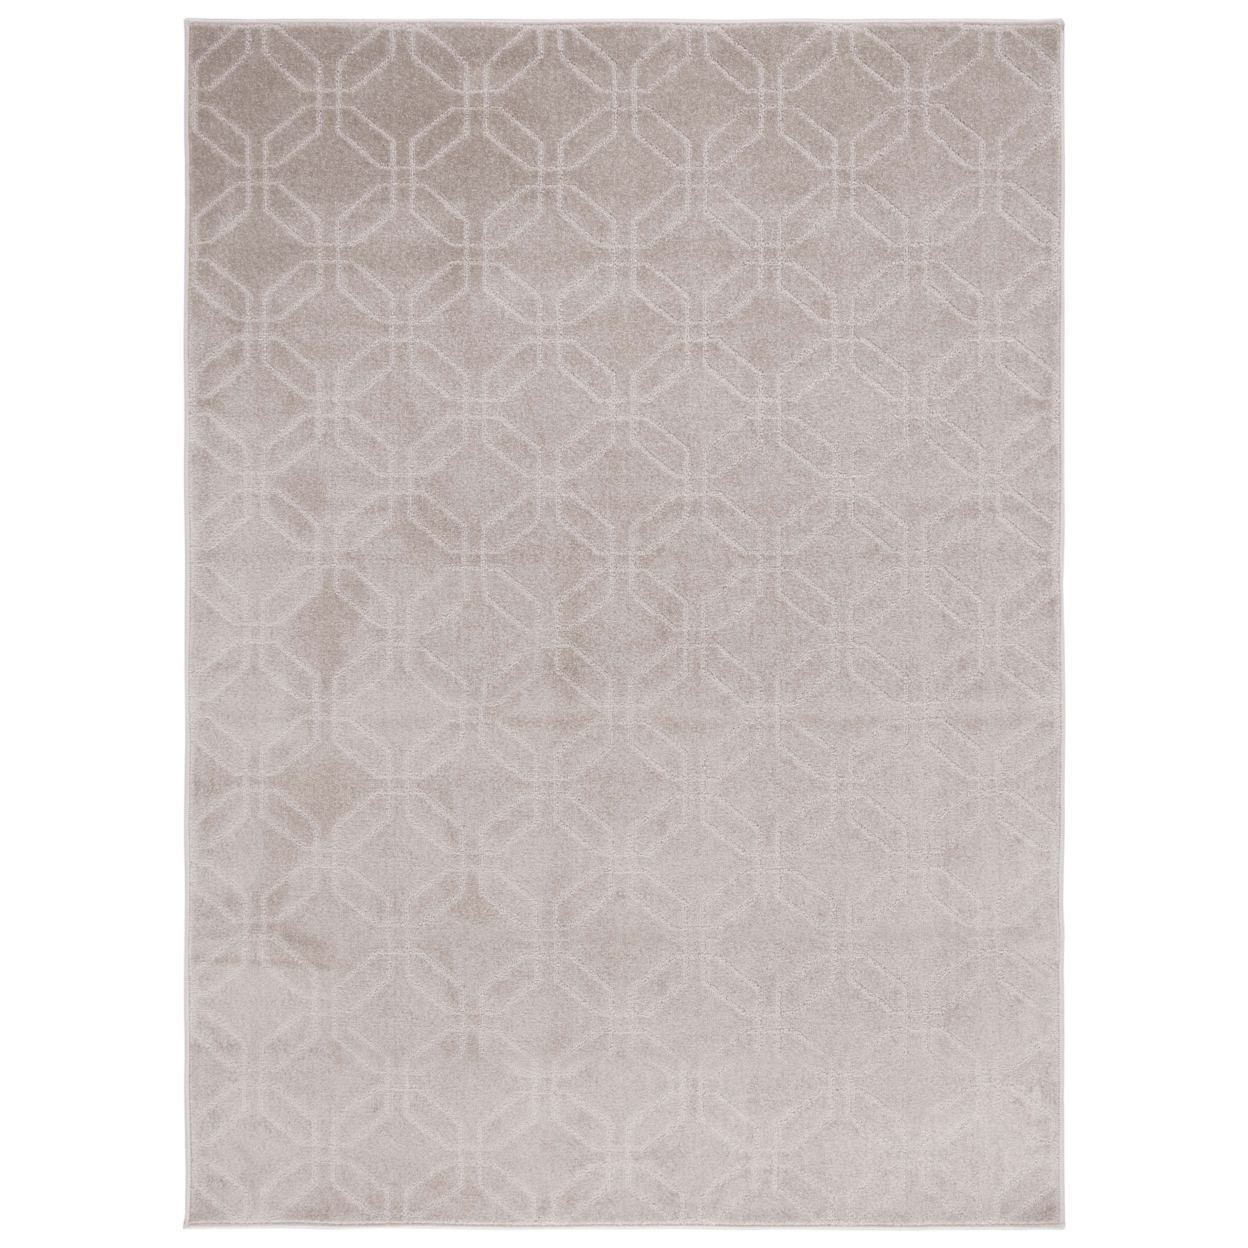 Safavieh PNS406B Pattern And Solid Beige - Grey / Ivory, 8' X 10' Rectangle